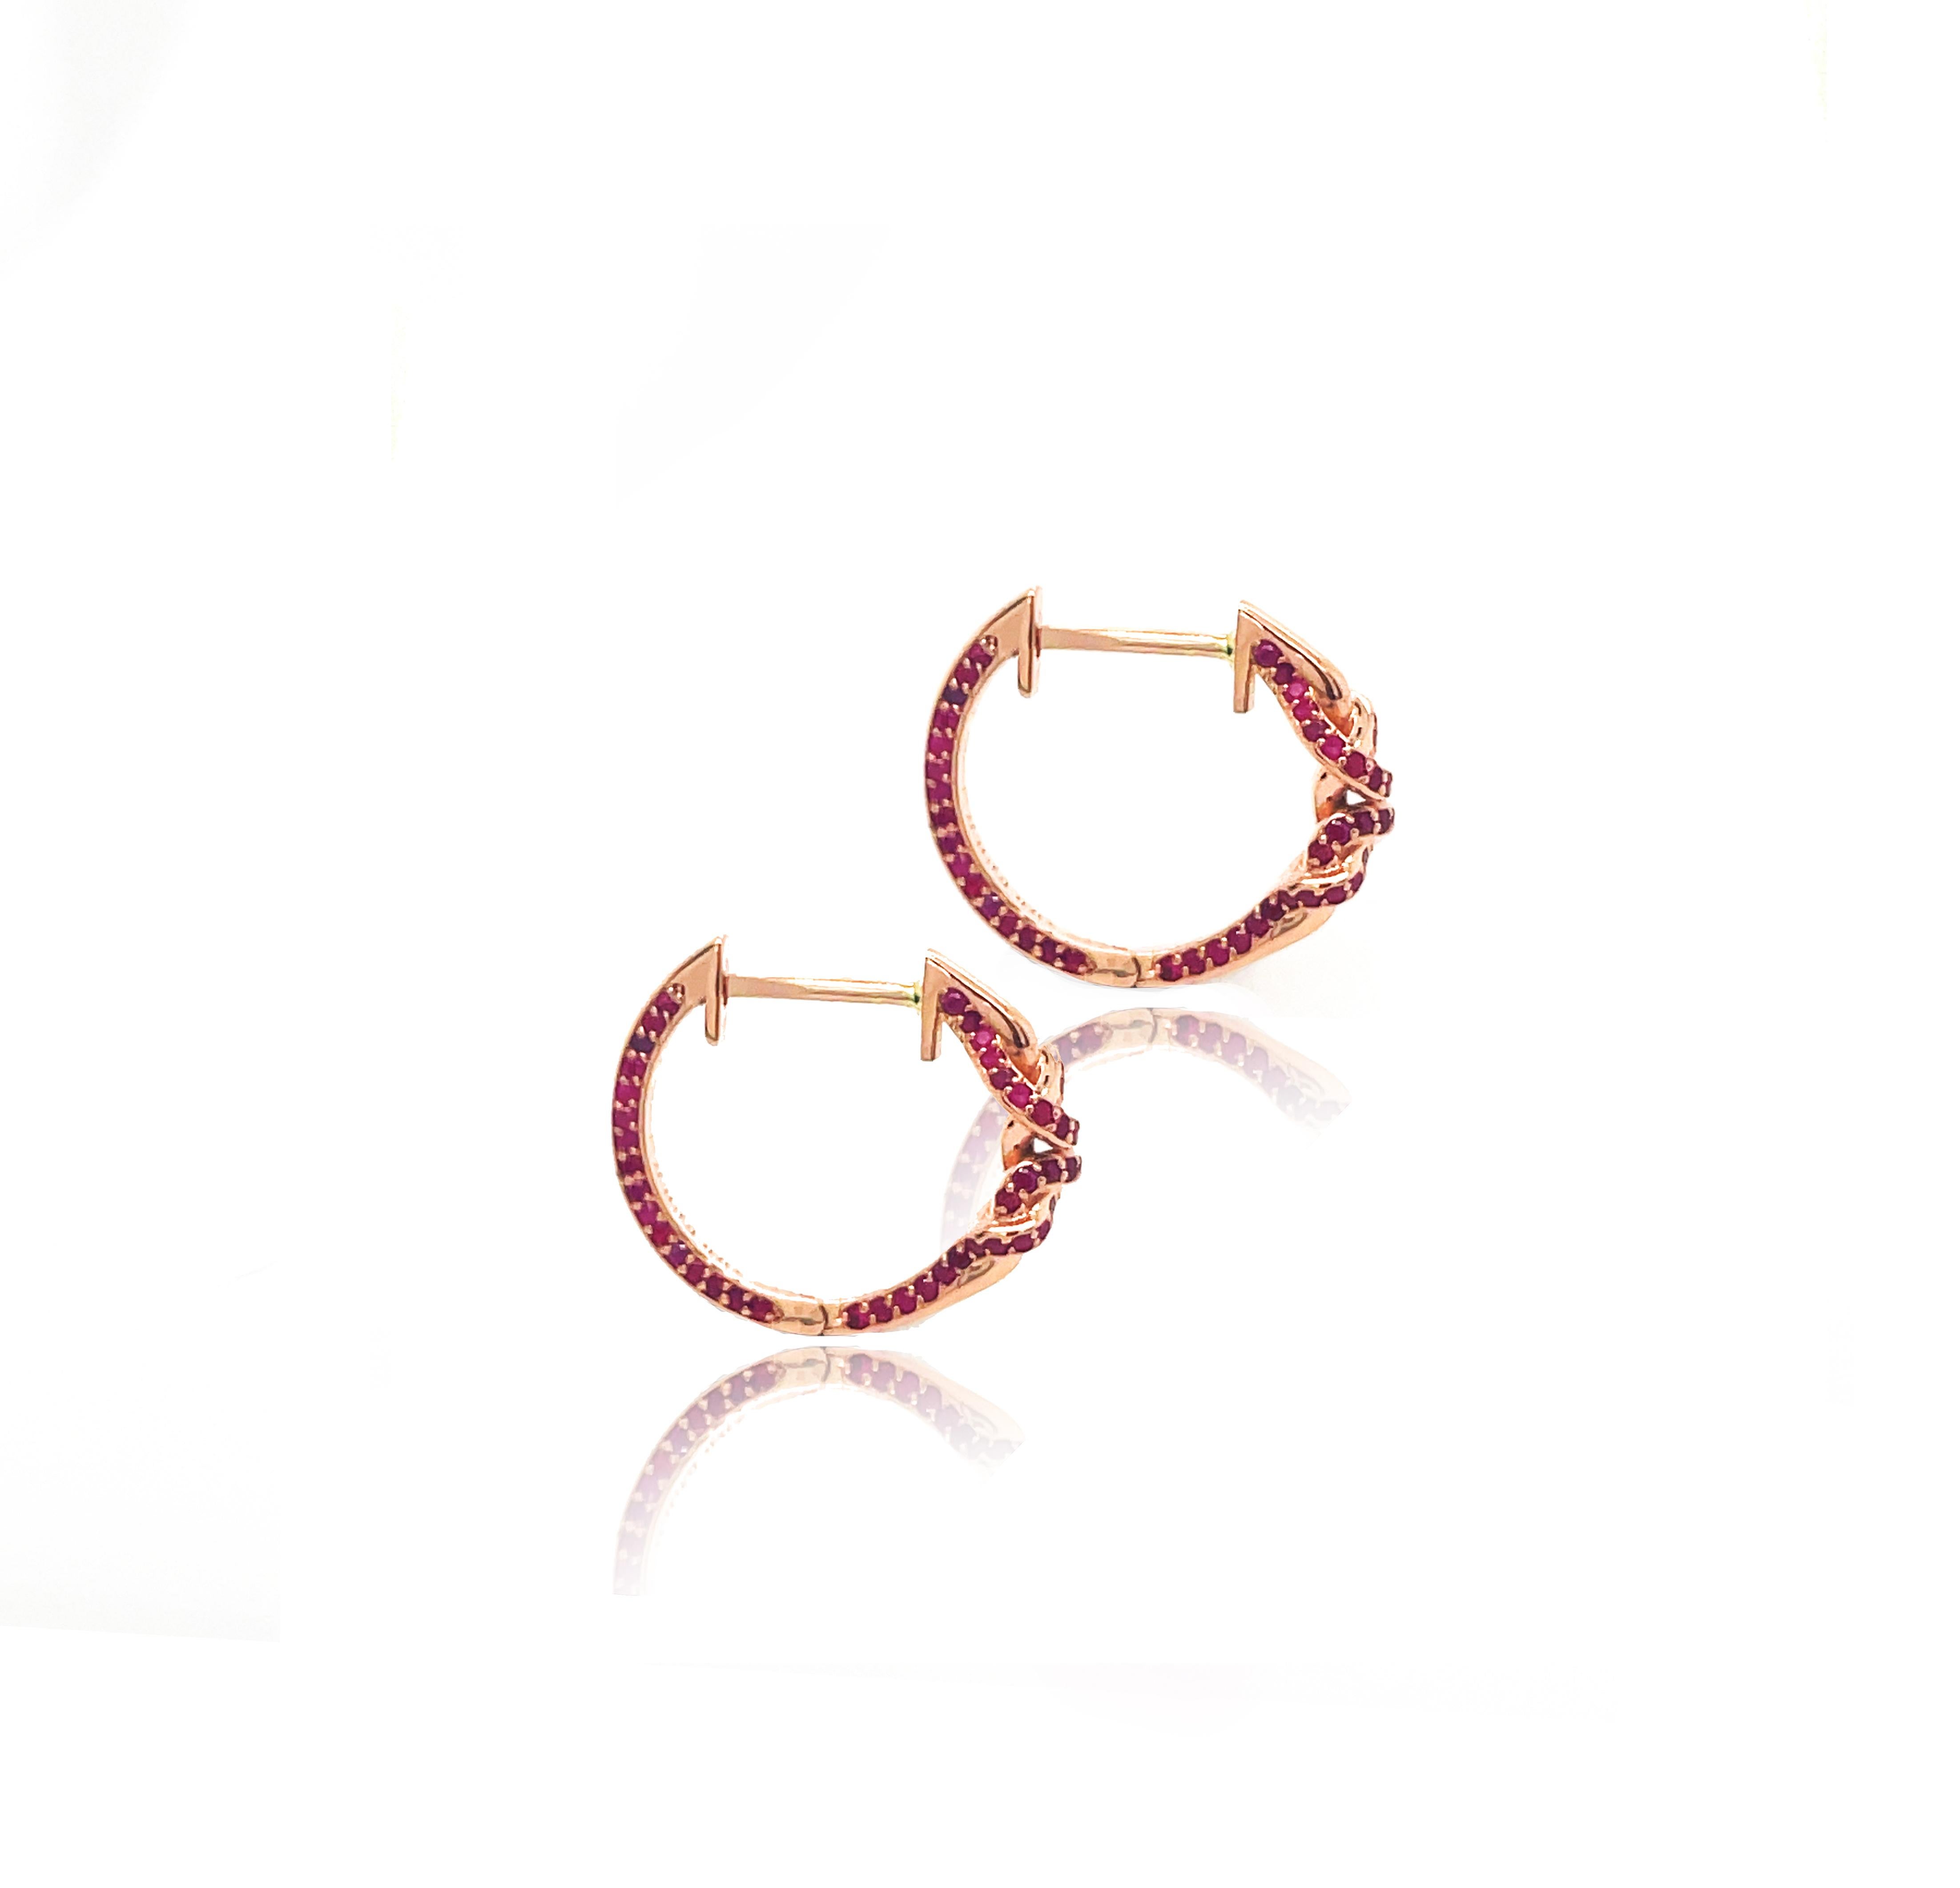 18ct rose gold
Ethically sourced gold and gemstones
Set with over 160 Rubies
15mm outer diameter

Please contact our customer service team discuss your size and track the production of your piece. 

Please contact our support team for alternate gold